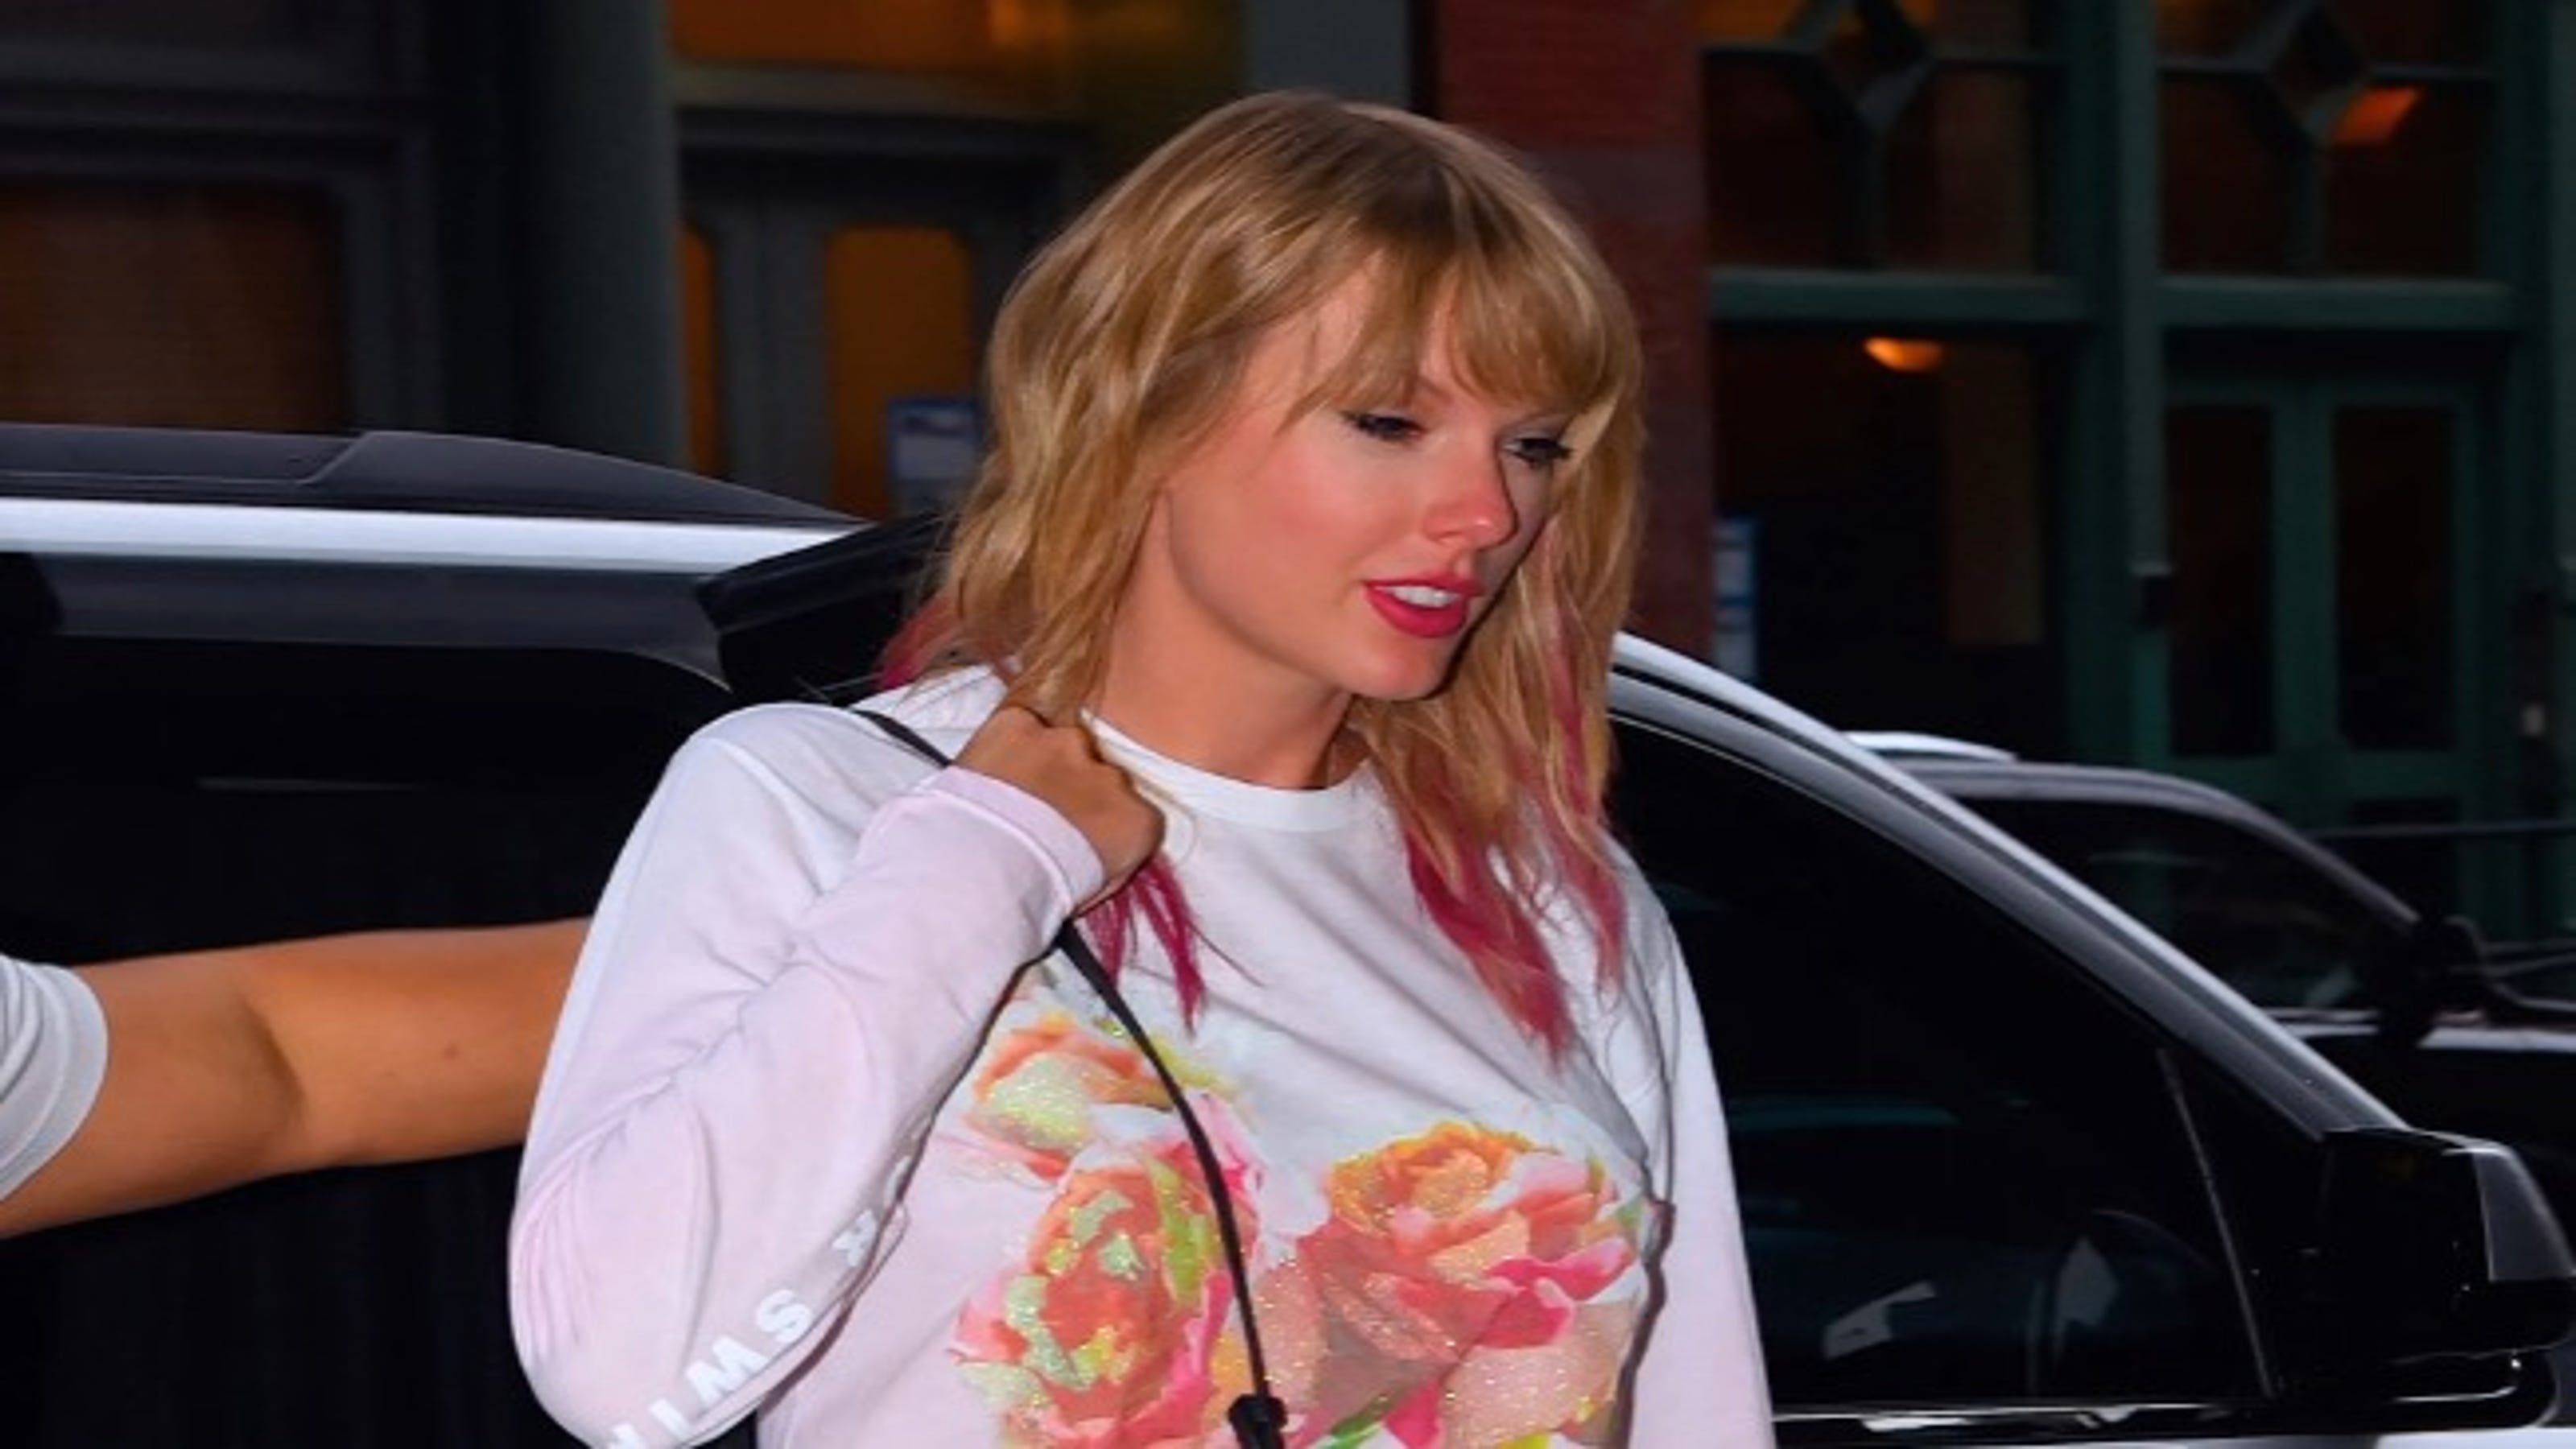 Taylor Swift Steps Out With New Pink Dip Dyed Hair